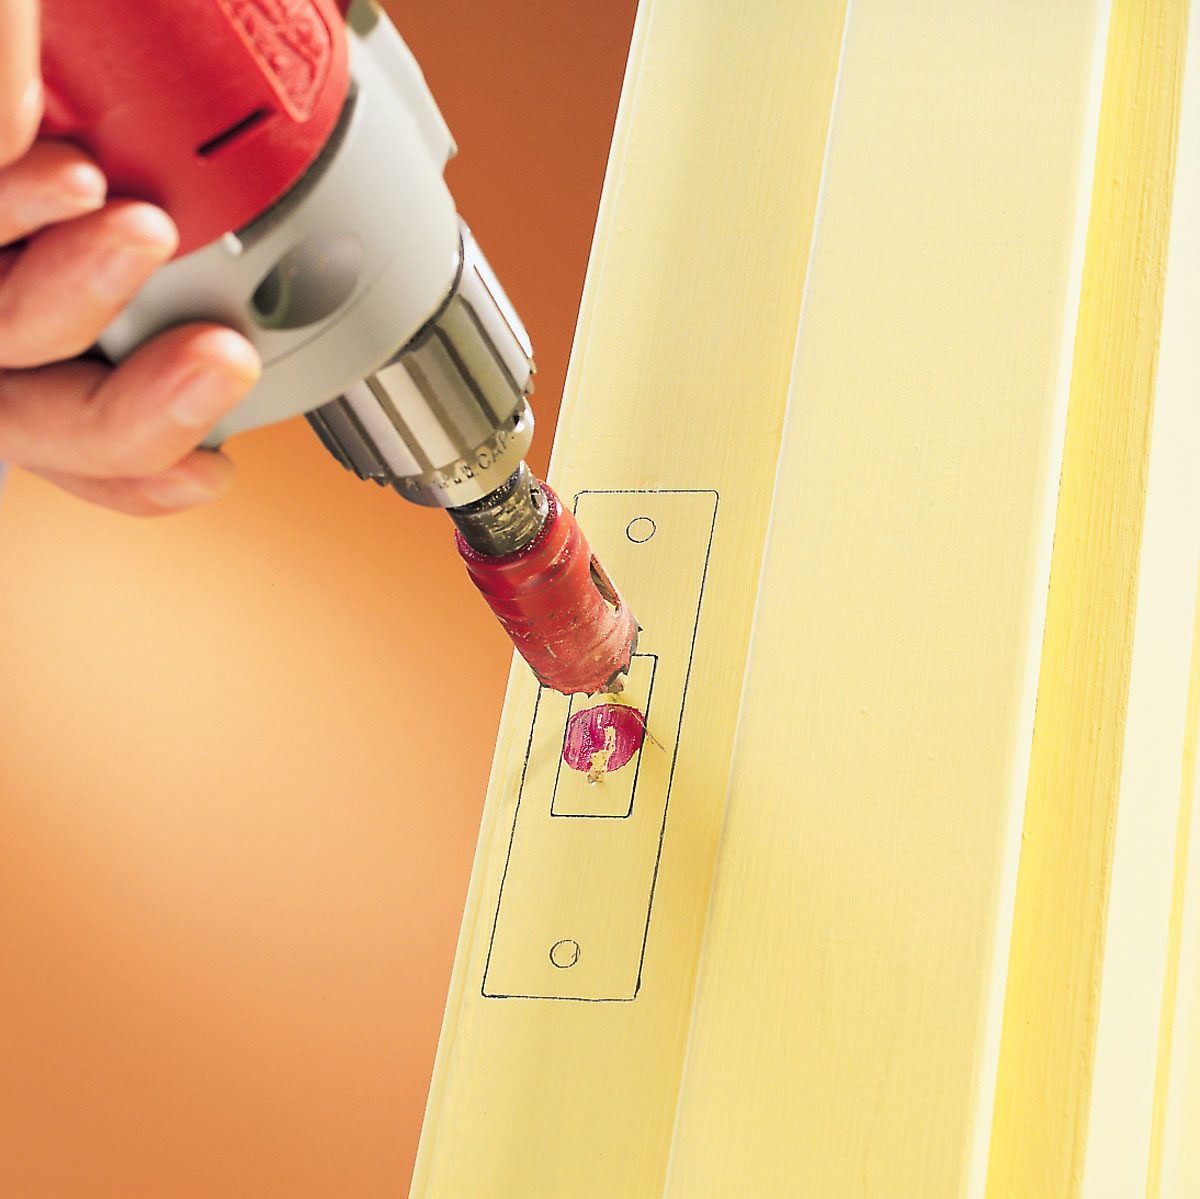 Drilling out a hole in Wooden Door, How To Install A Deadbolt Lock